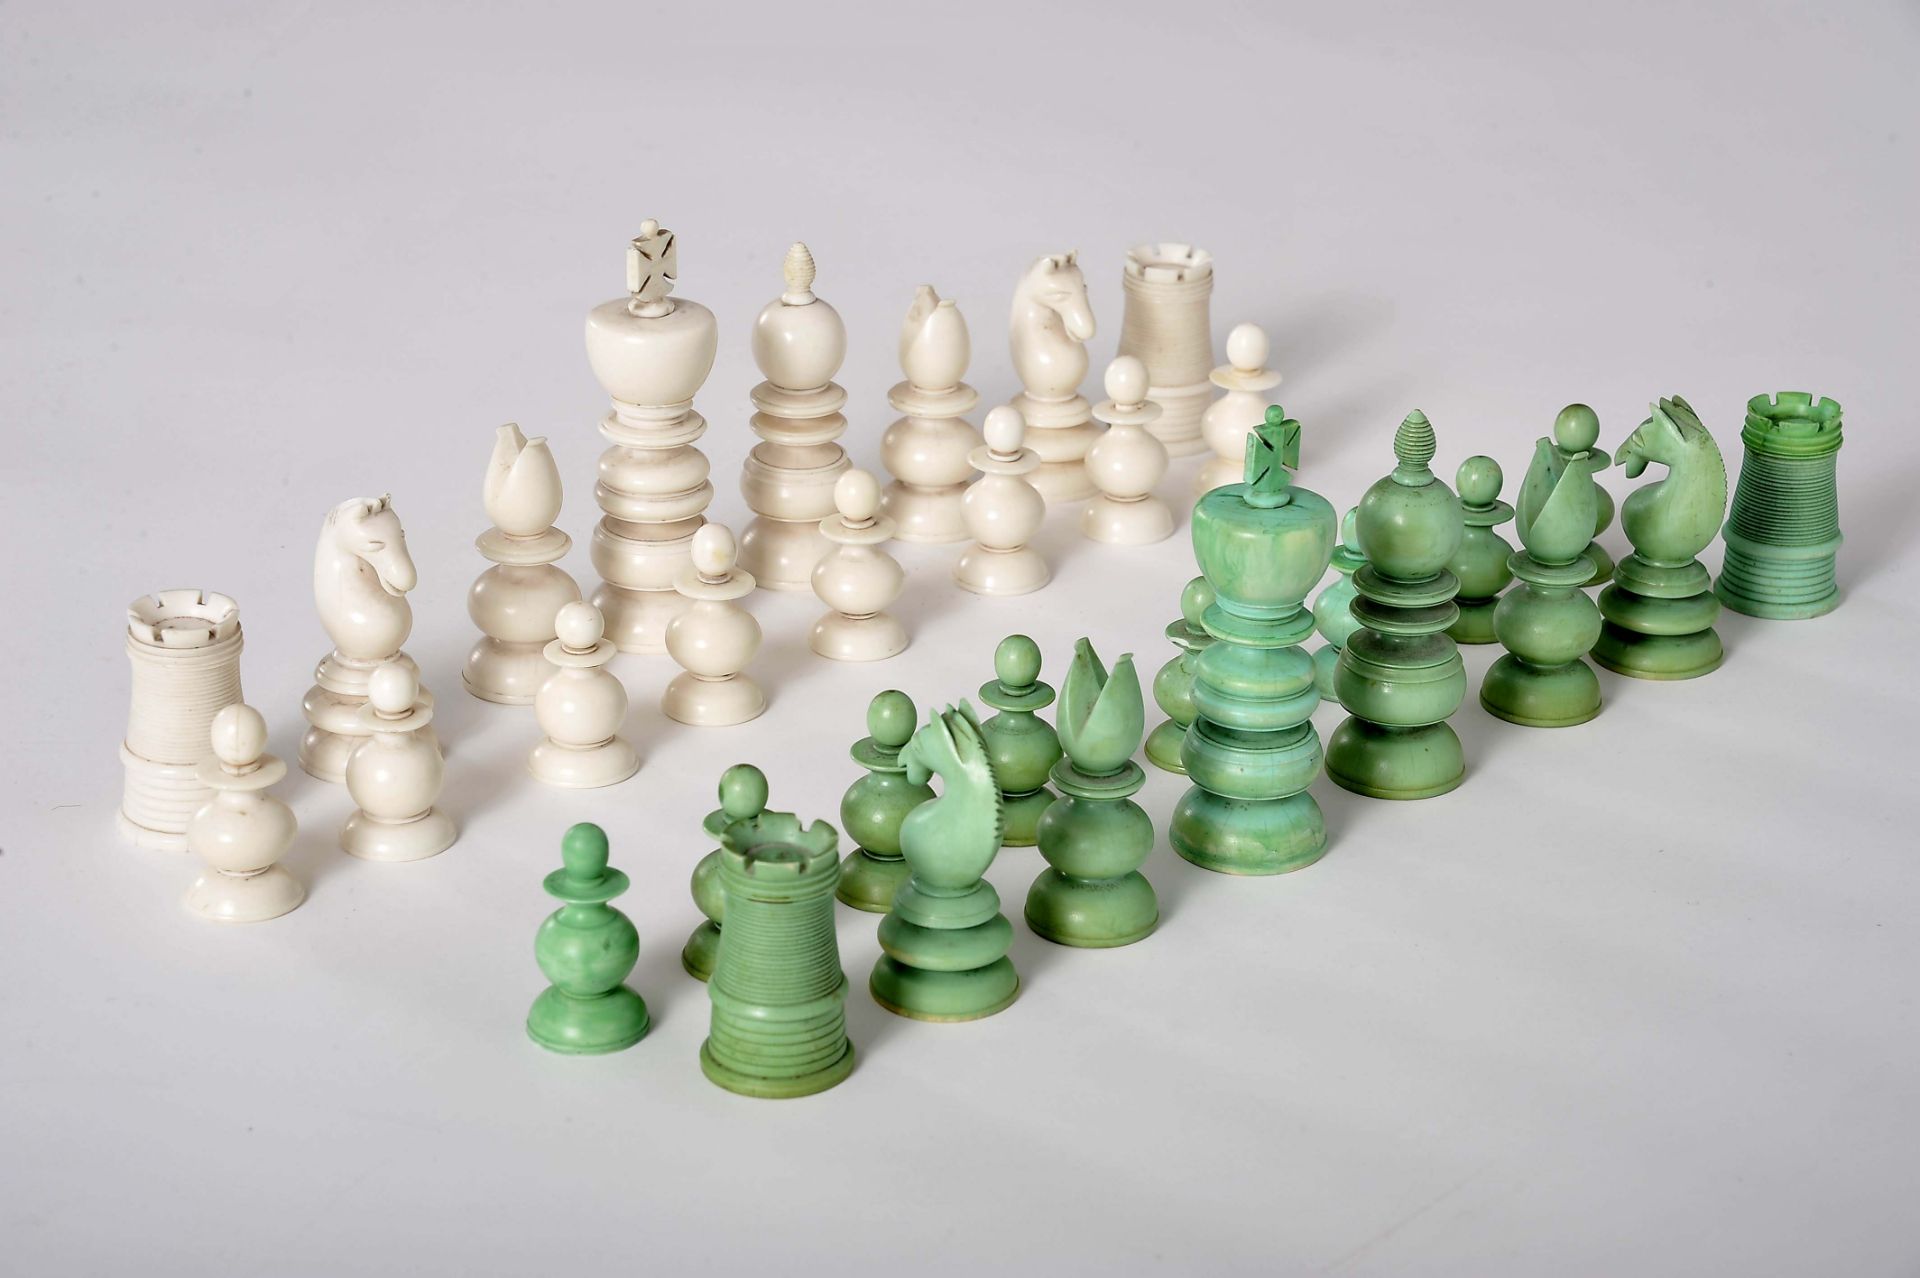 Chess pieces "Saint George" pattern - Image 2 of 7